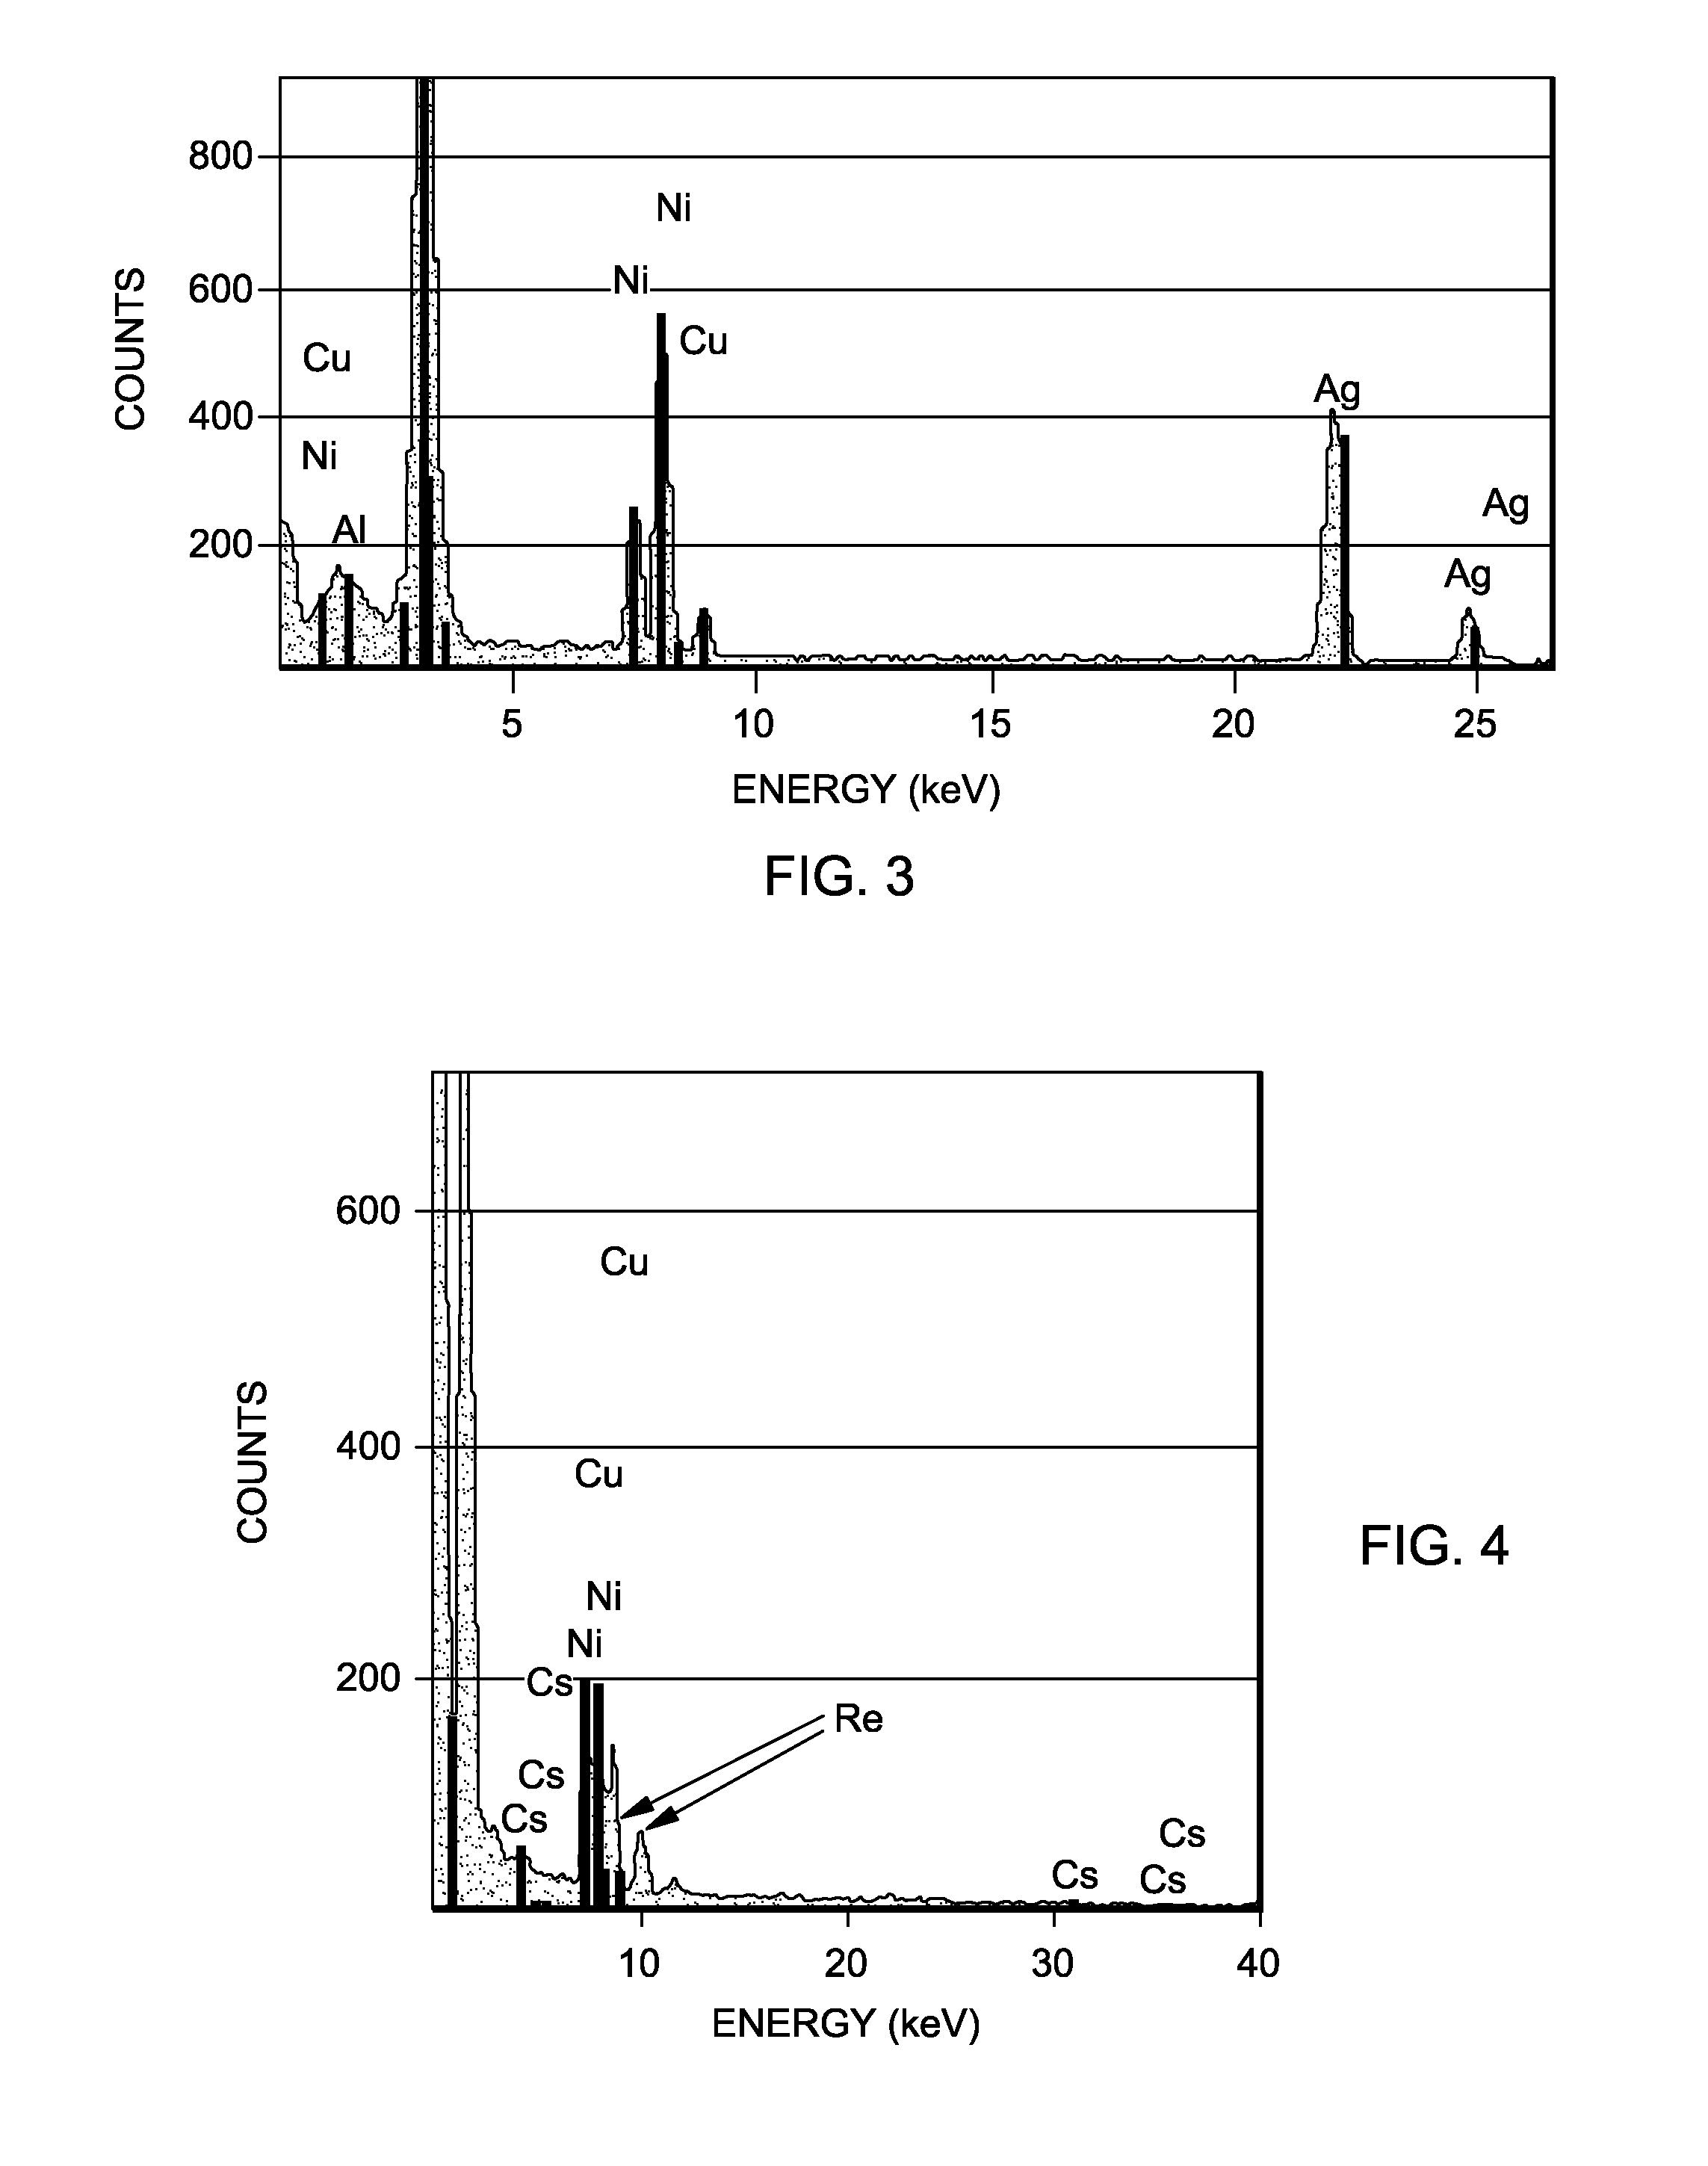 Epoxidation process and microstructure